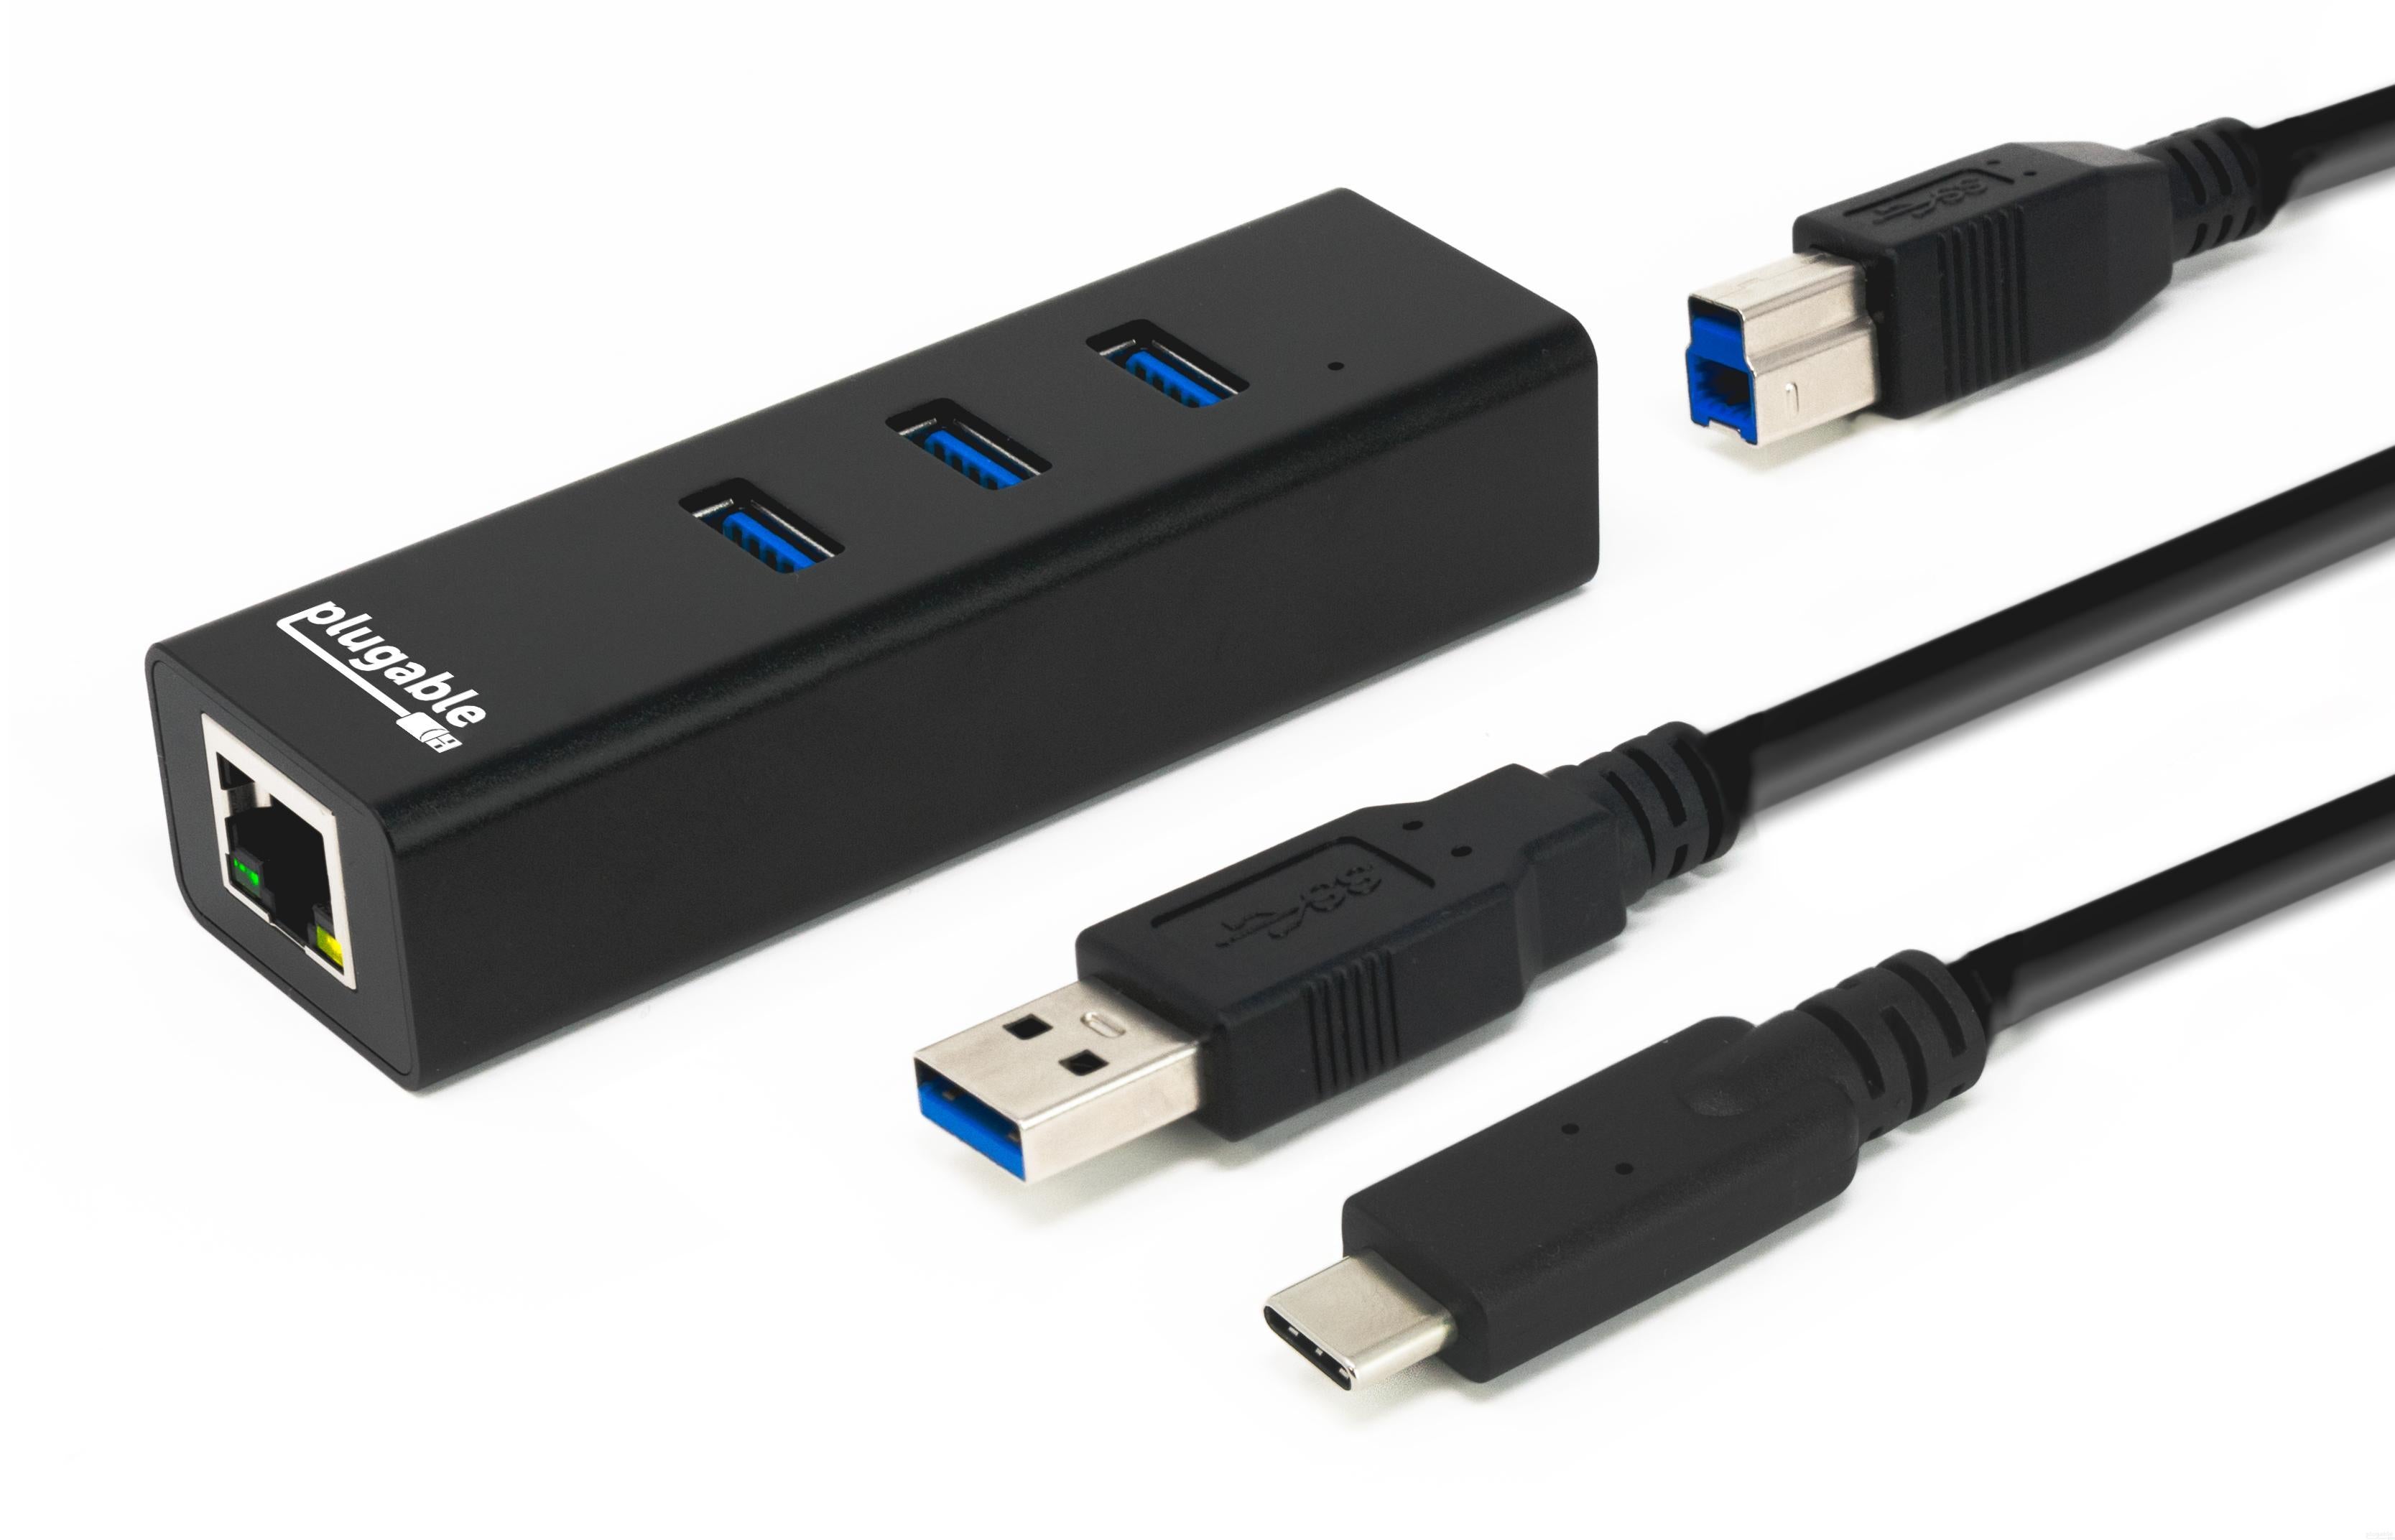 Cable Matters 3 Port USB 3.0 Hub with Ethernet USB Hub with Ethernet / Gigabit 